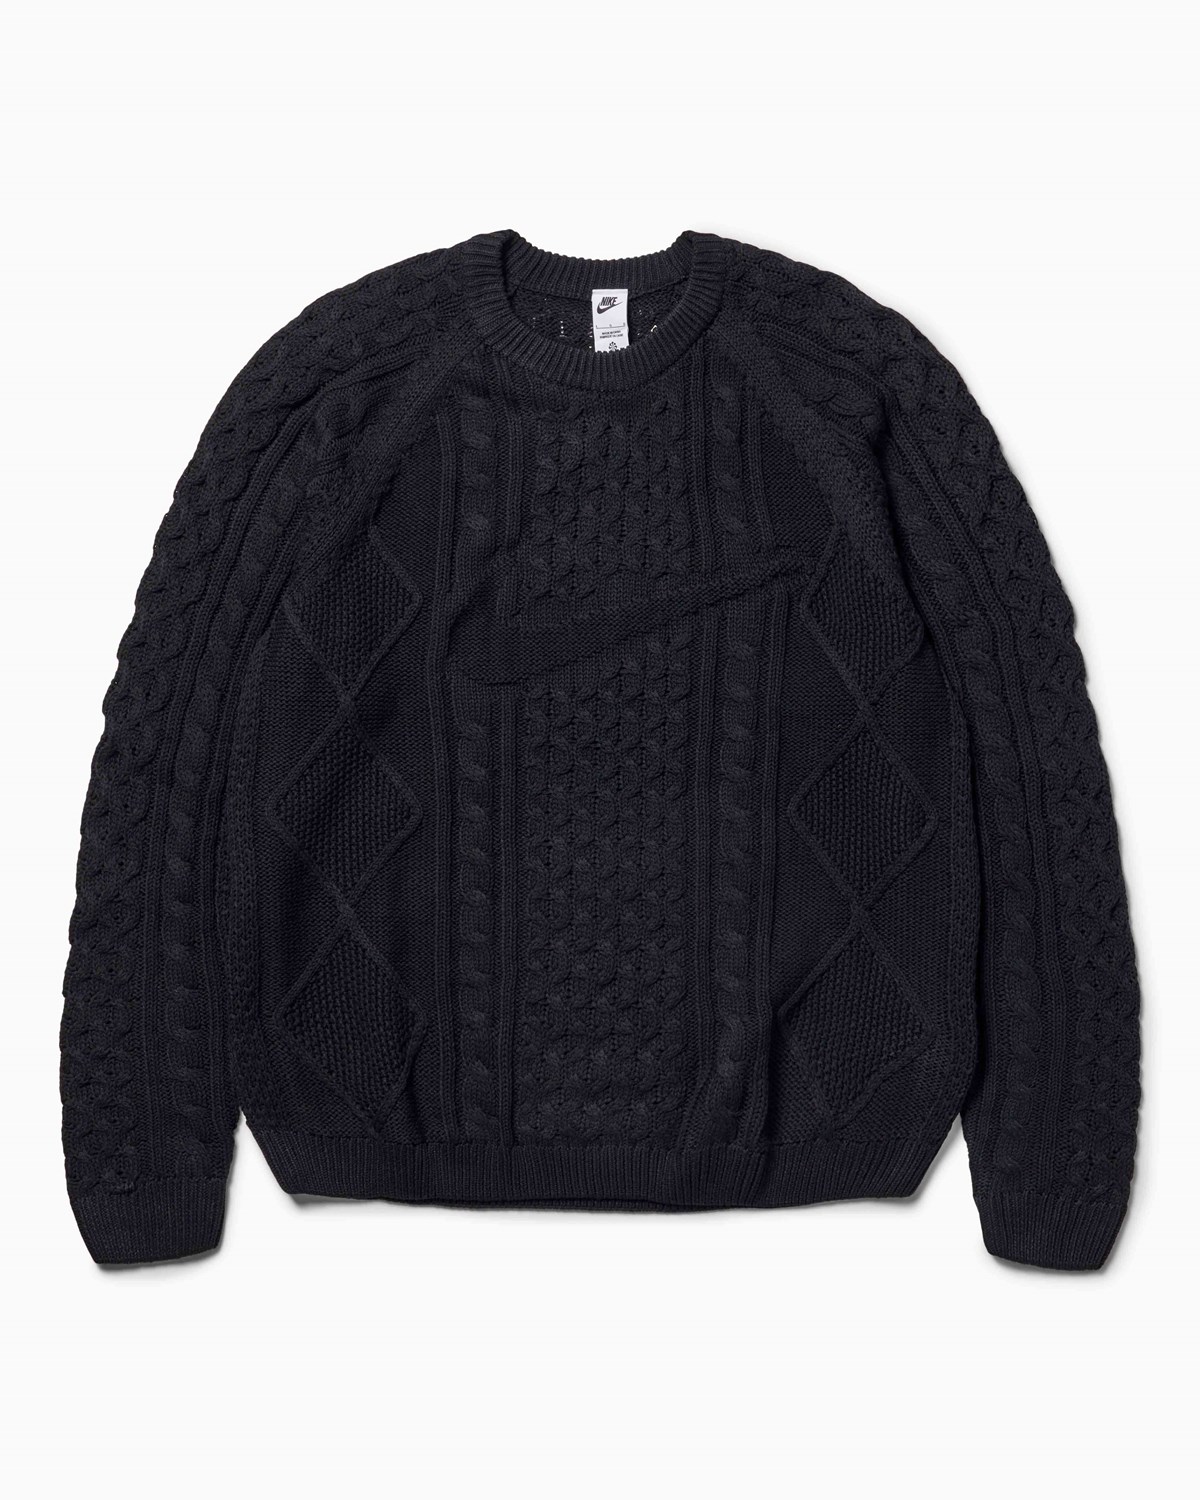 Cable-Knit Sweater Nike Tops Knitwear Black